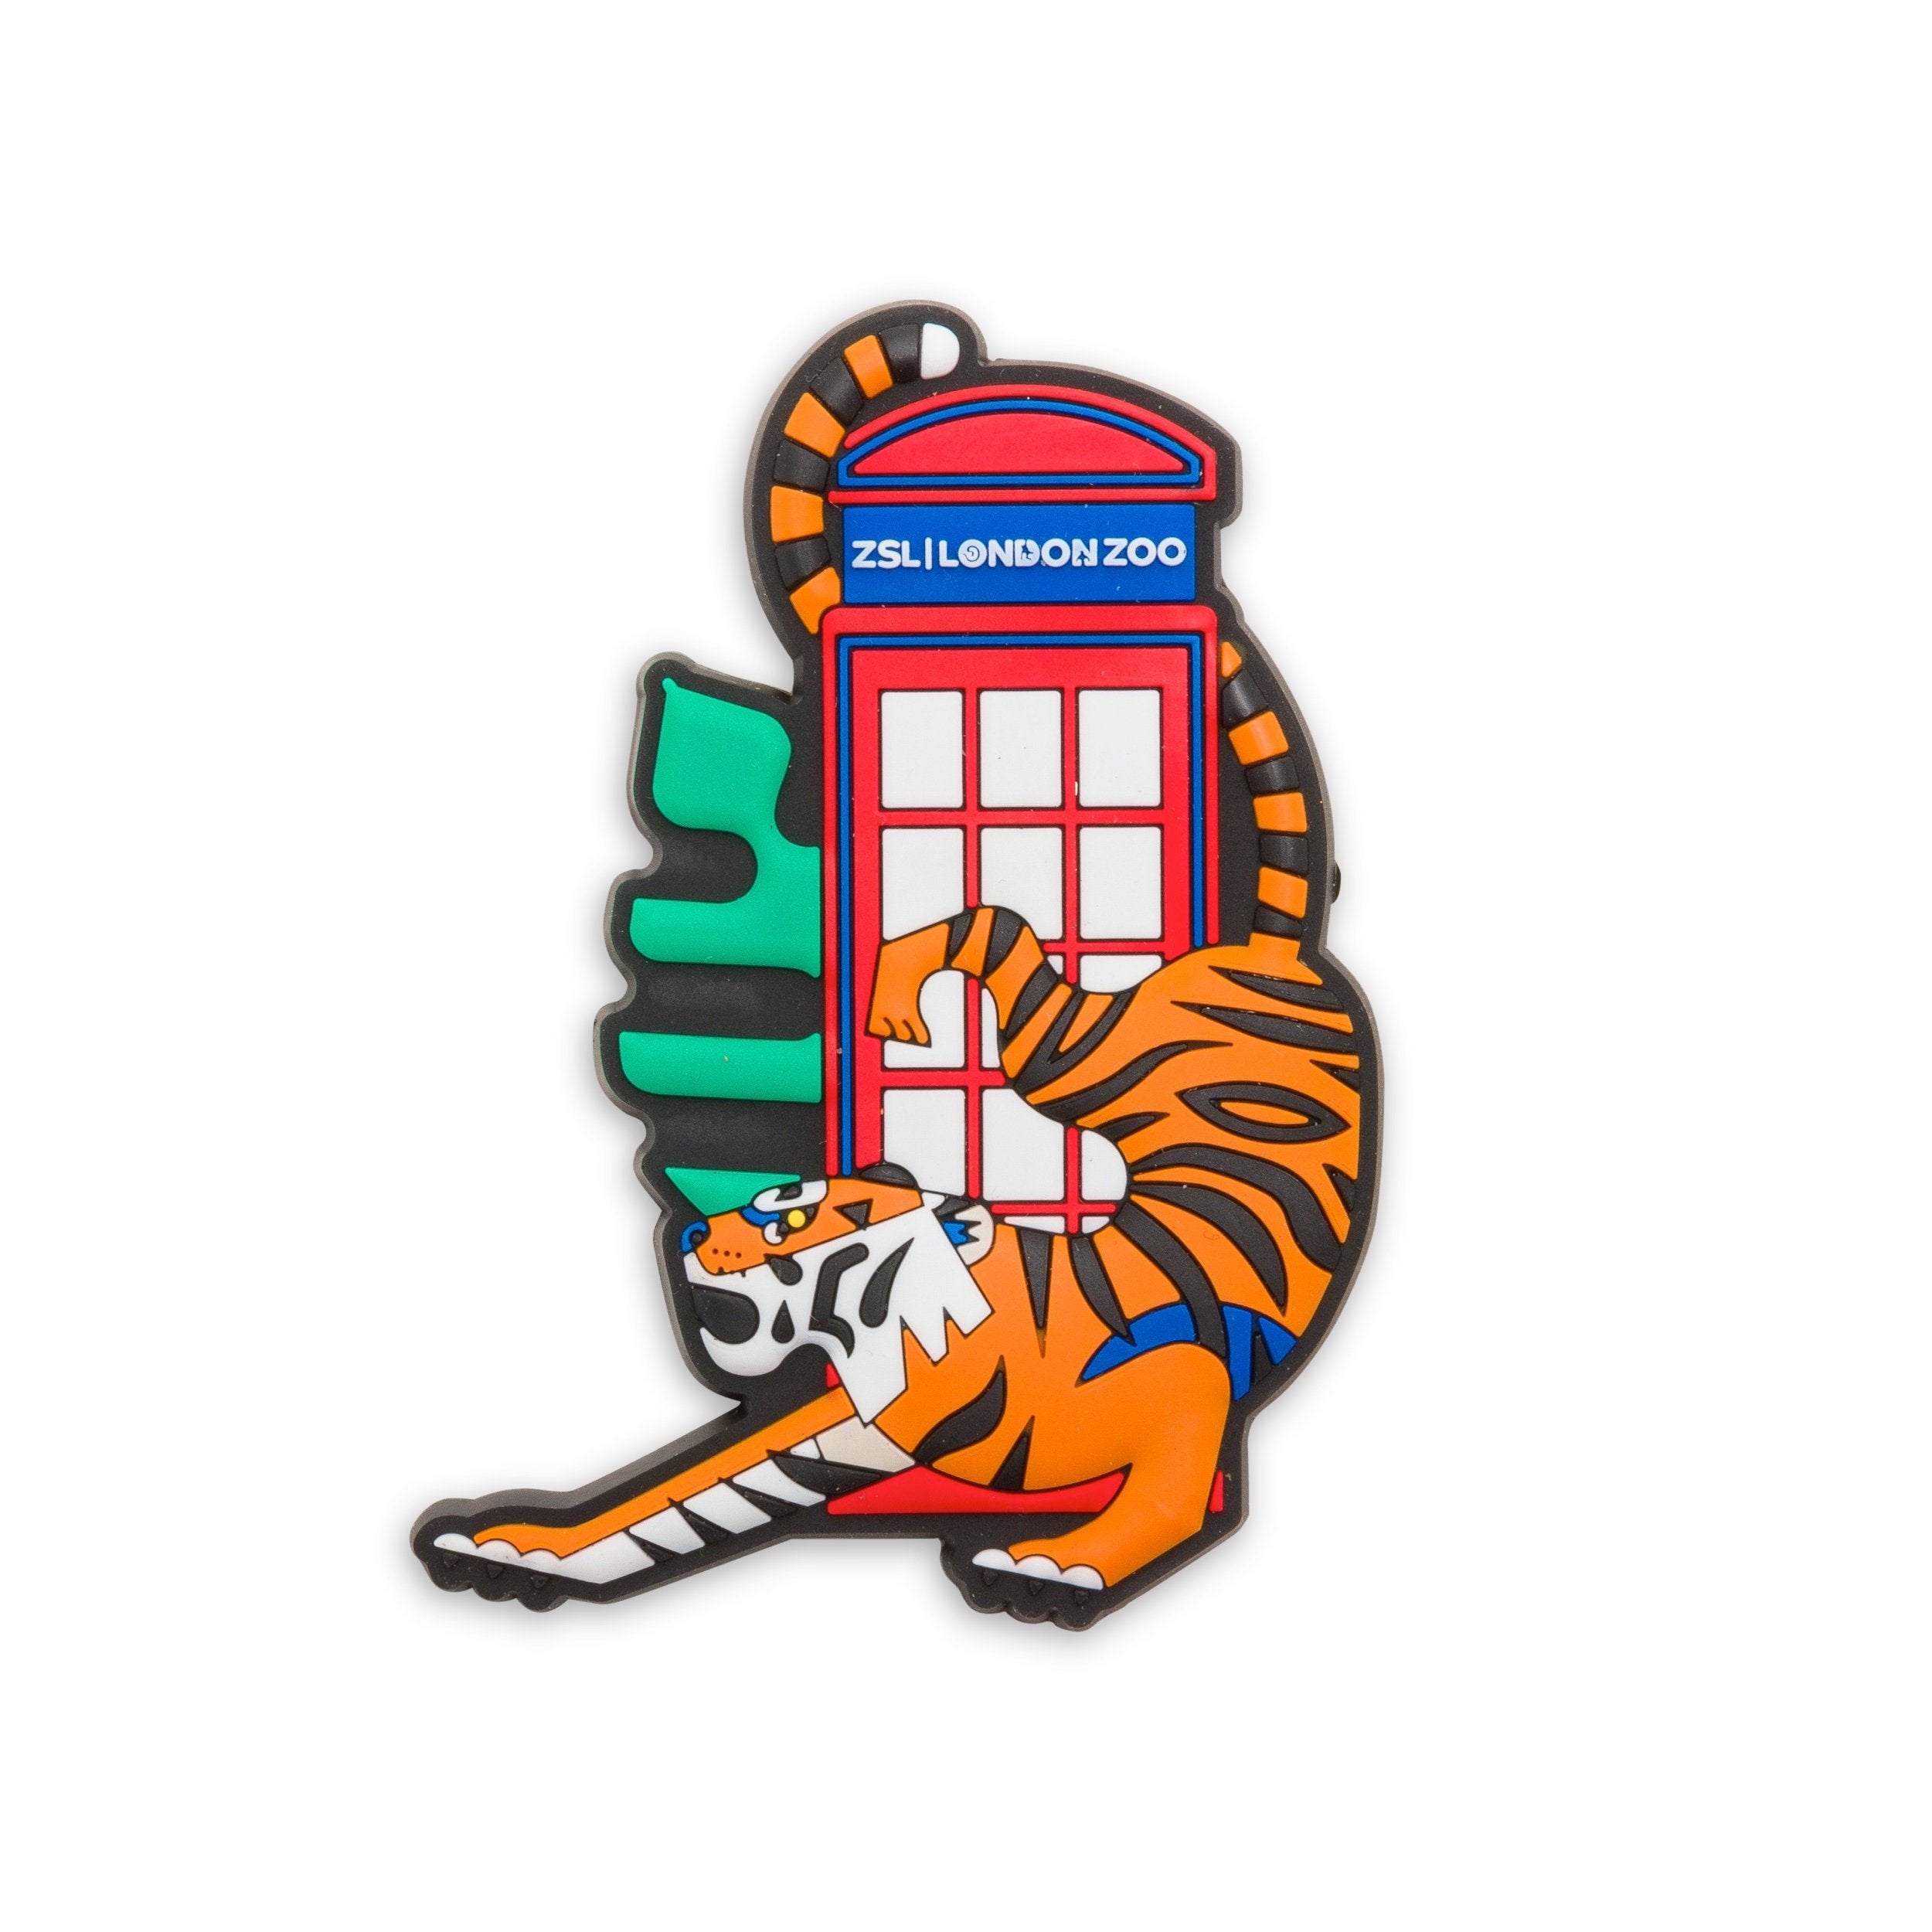 ZSL London Zoo Tiger and Phone booth Magnet